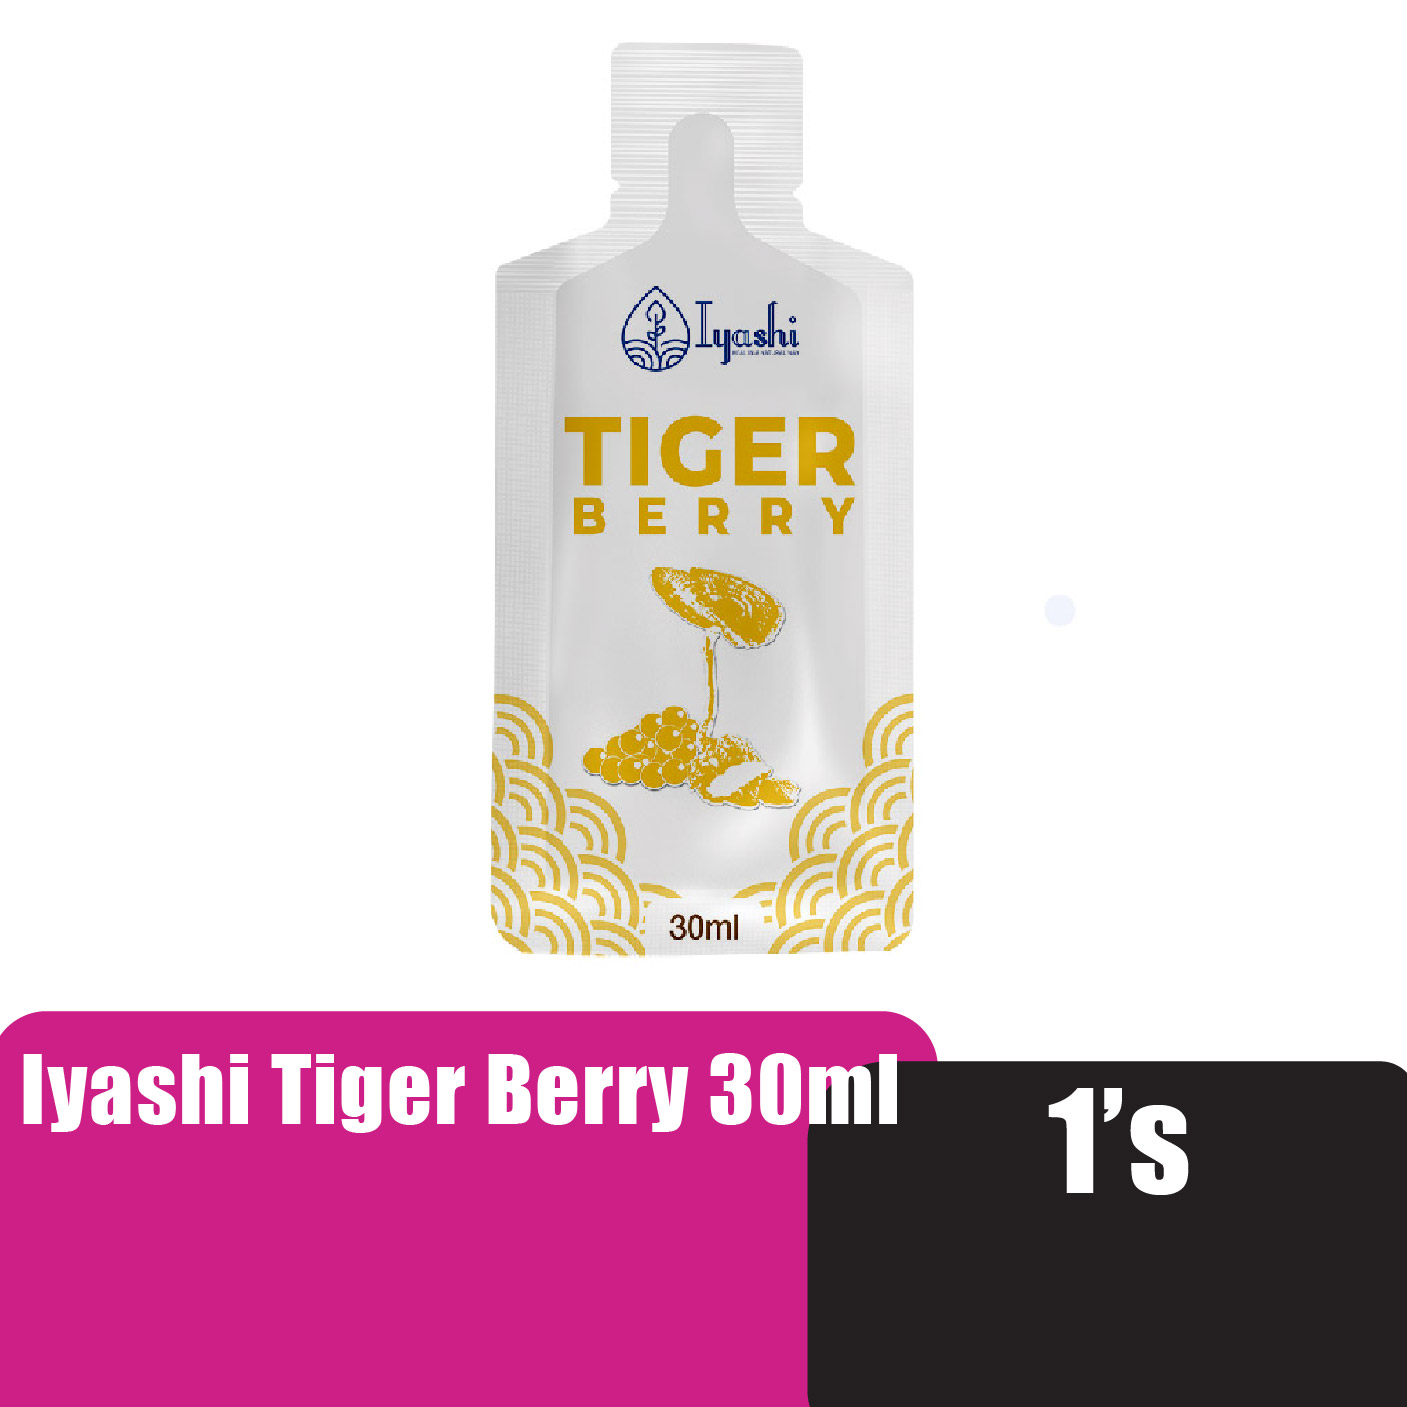 IYASHI Tiger Berry 虎乳芝 Tiger Milk Mushroom Kids & Adults ( Lung Supplement / 补肺 / Relief of Cough, Cold  ) 30ml X 1's